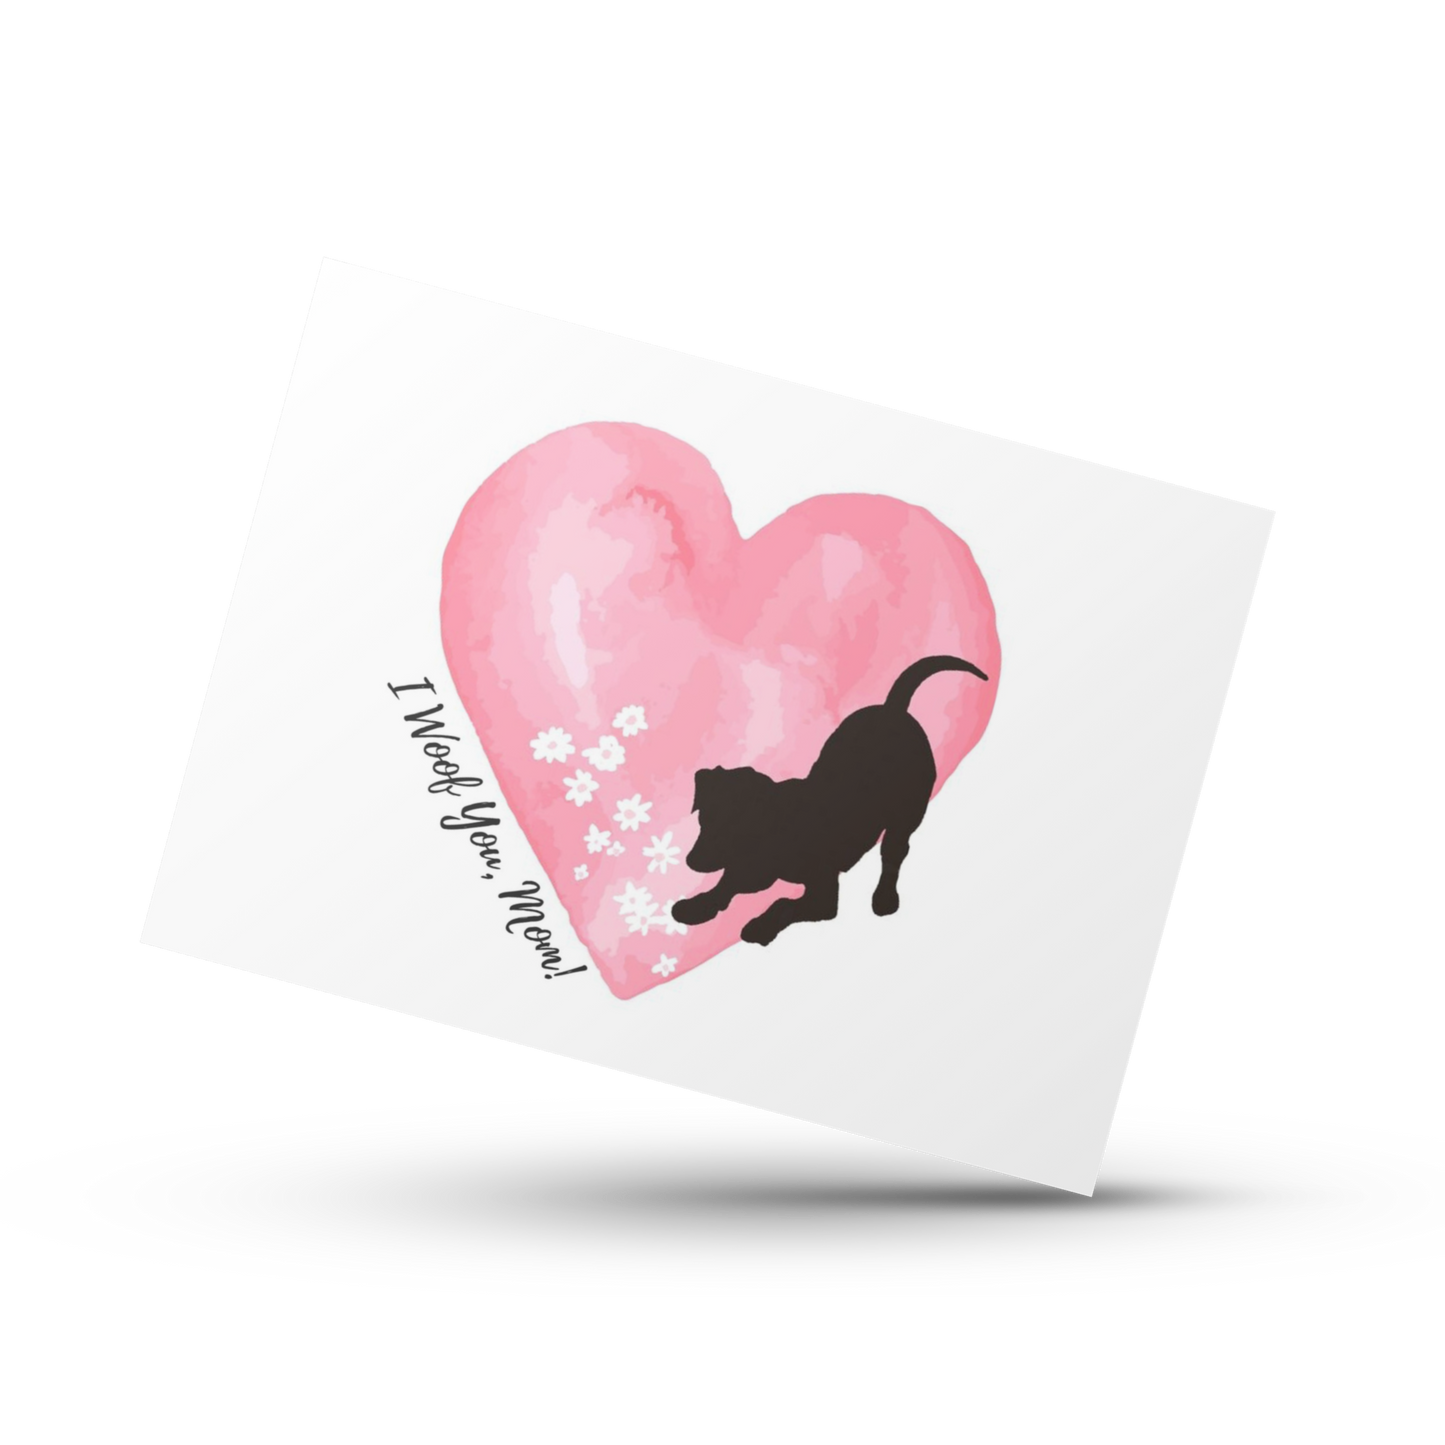 I woof you mom, Mother's Day card, Dog mom card, Fur mom card, Card from dog, Cute dog greeting card, I love you card for mom, Family pet